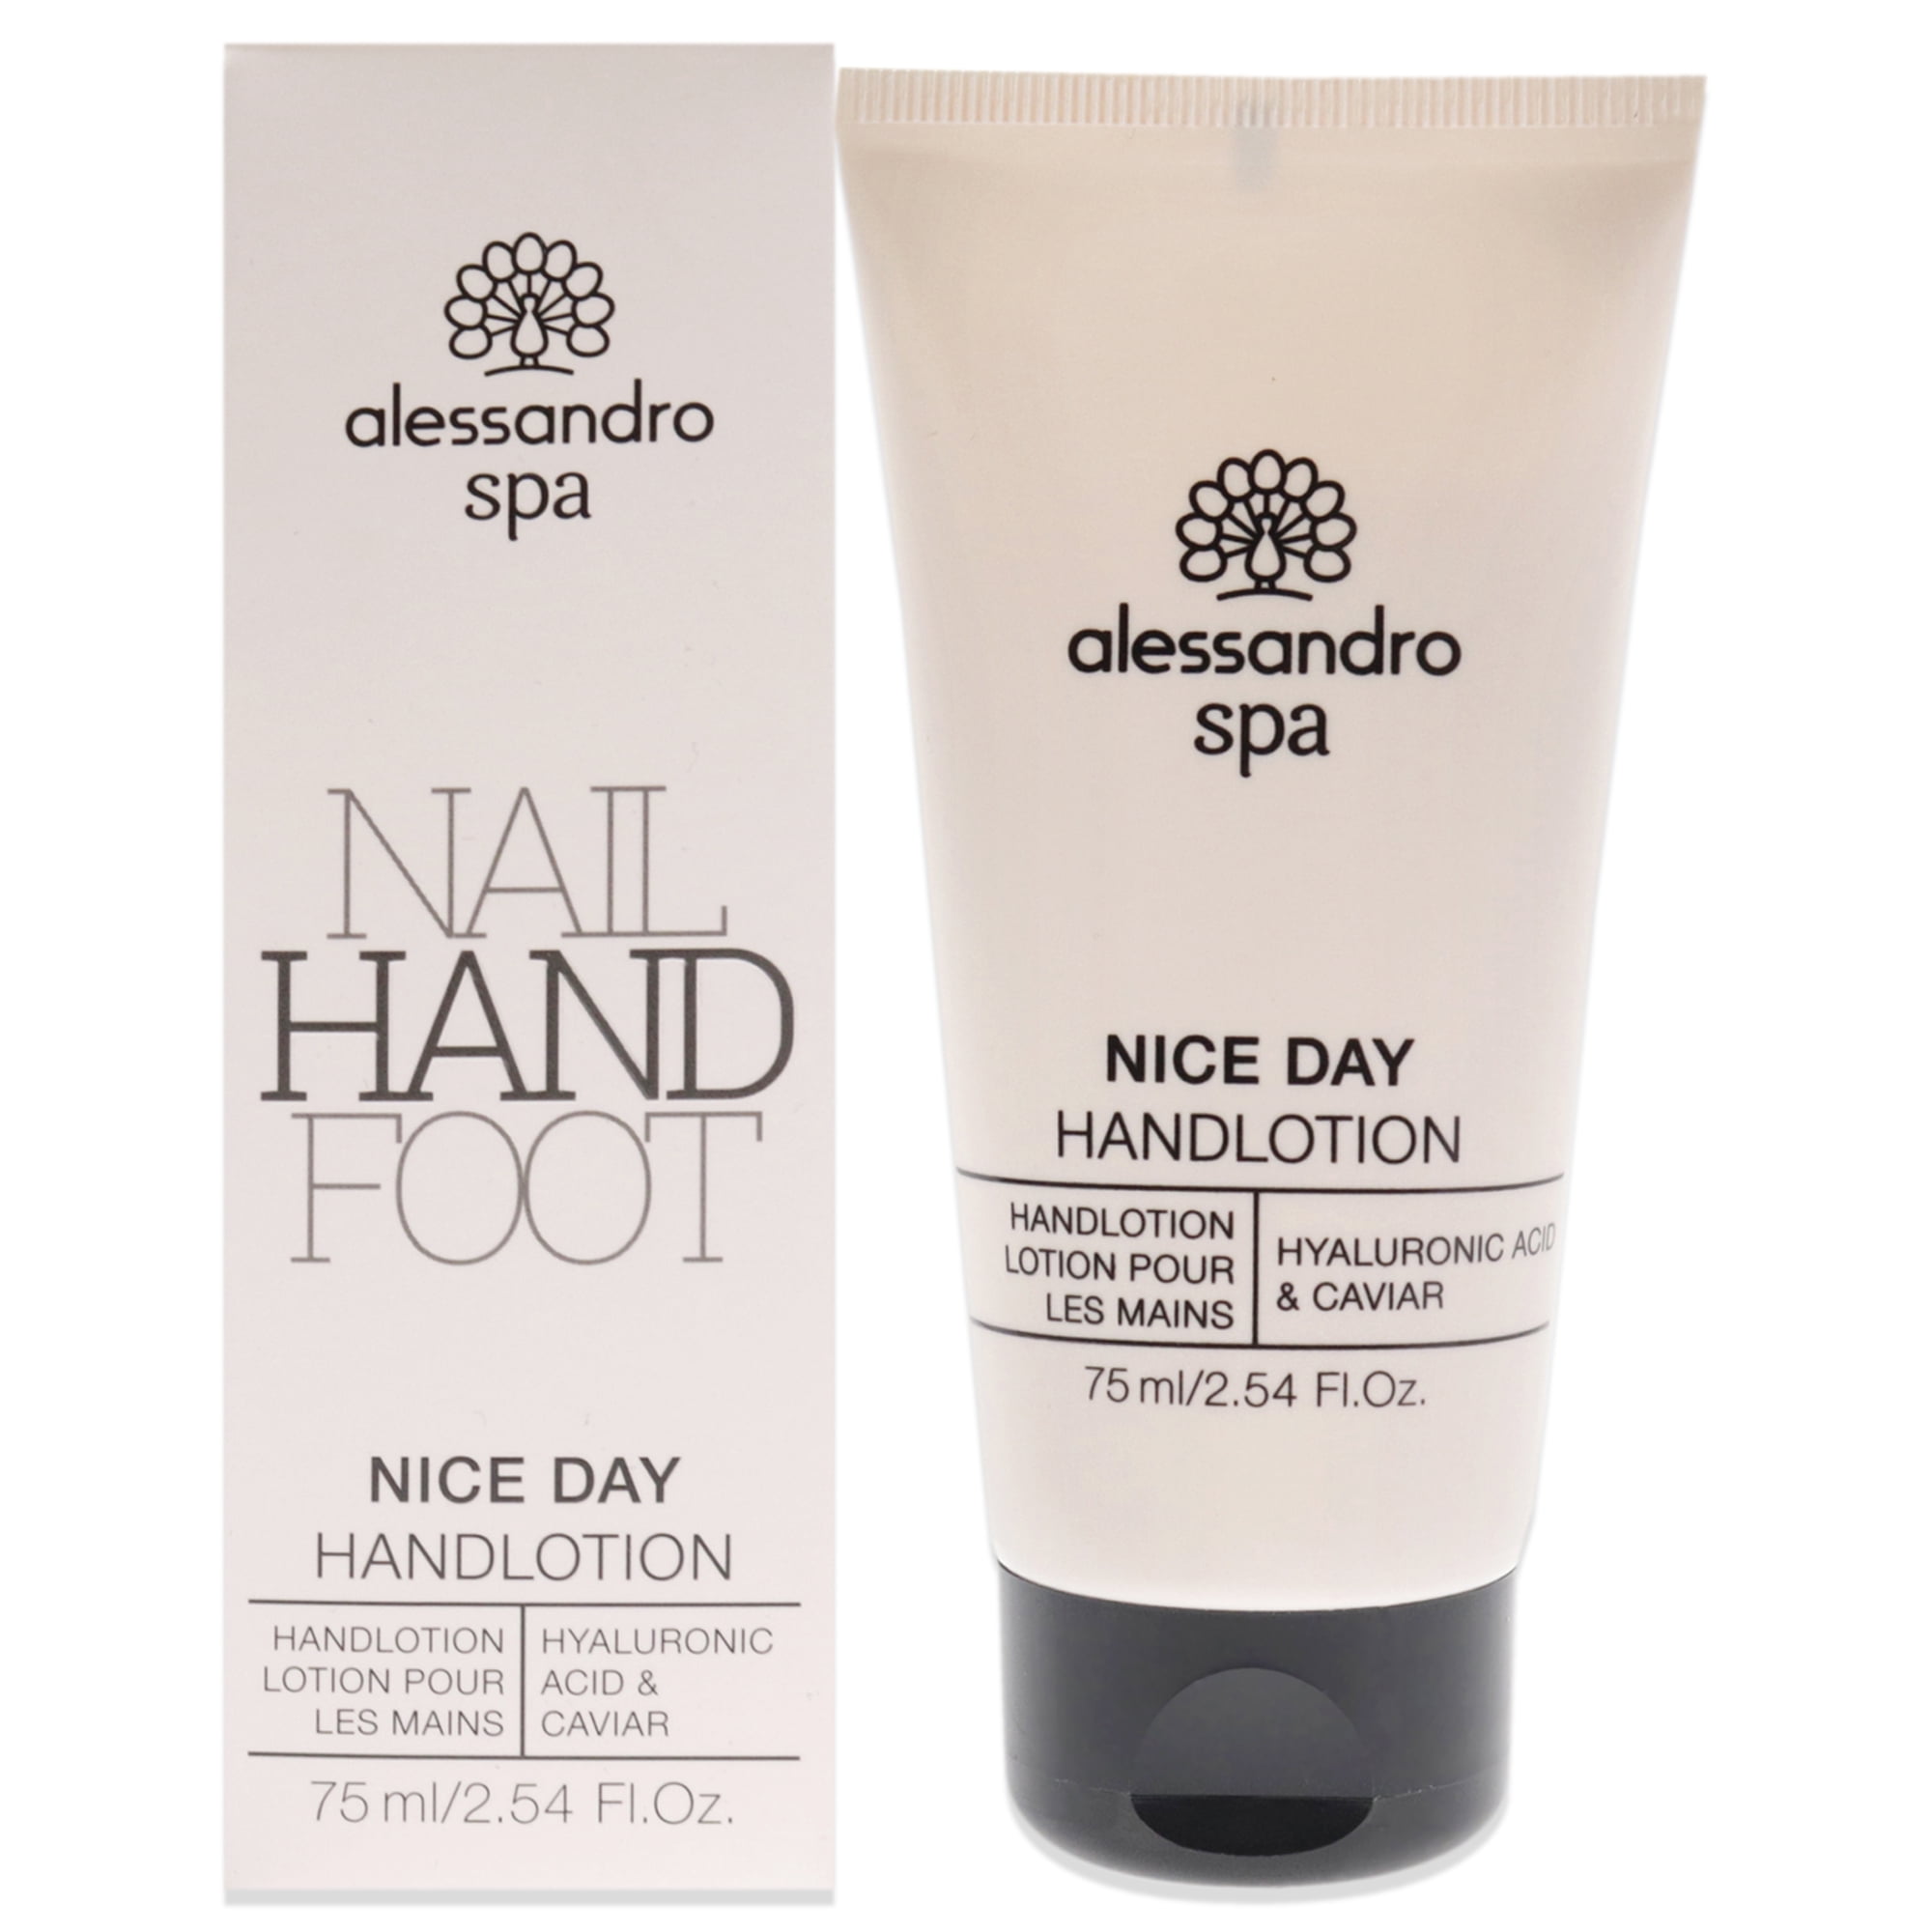 2.54 Alessandro Spa Day Hand Nice Lotion, oz Lotion